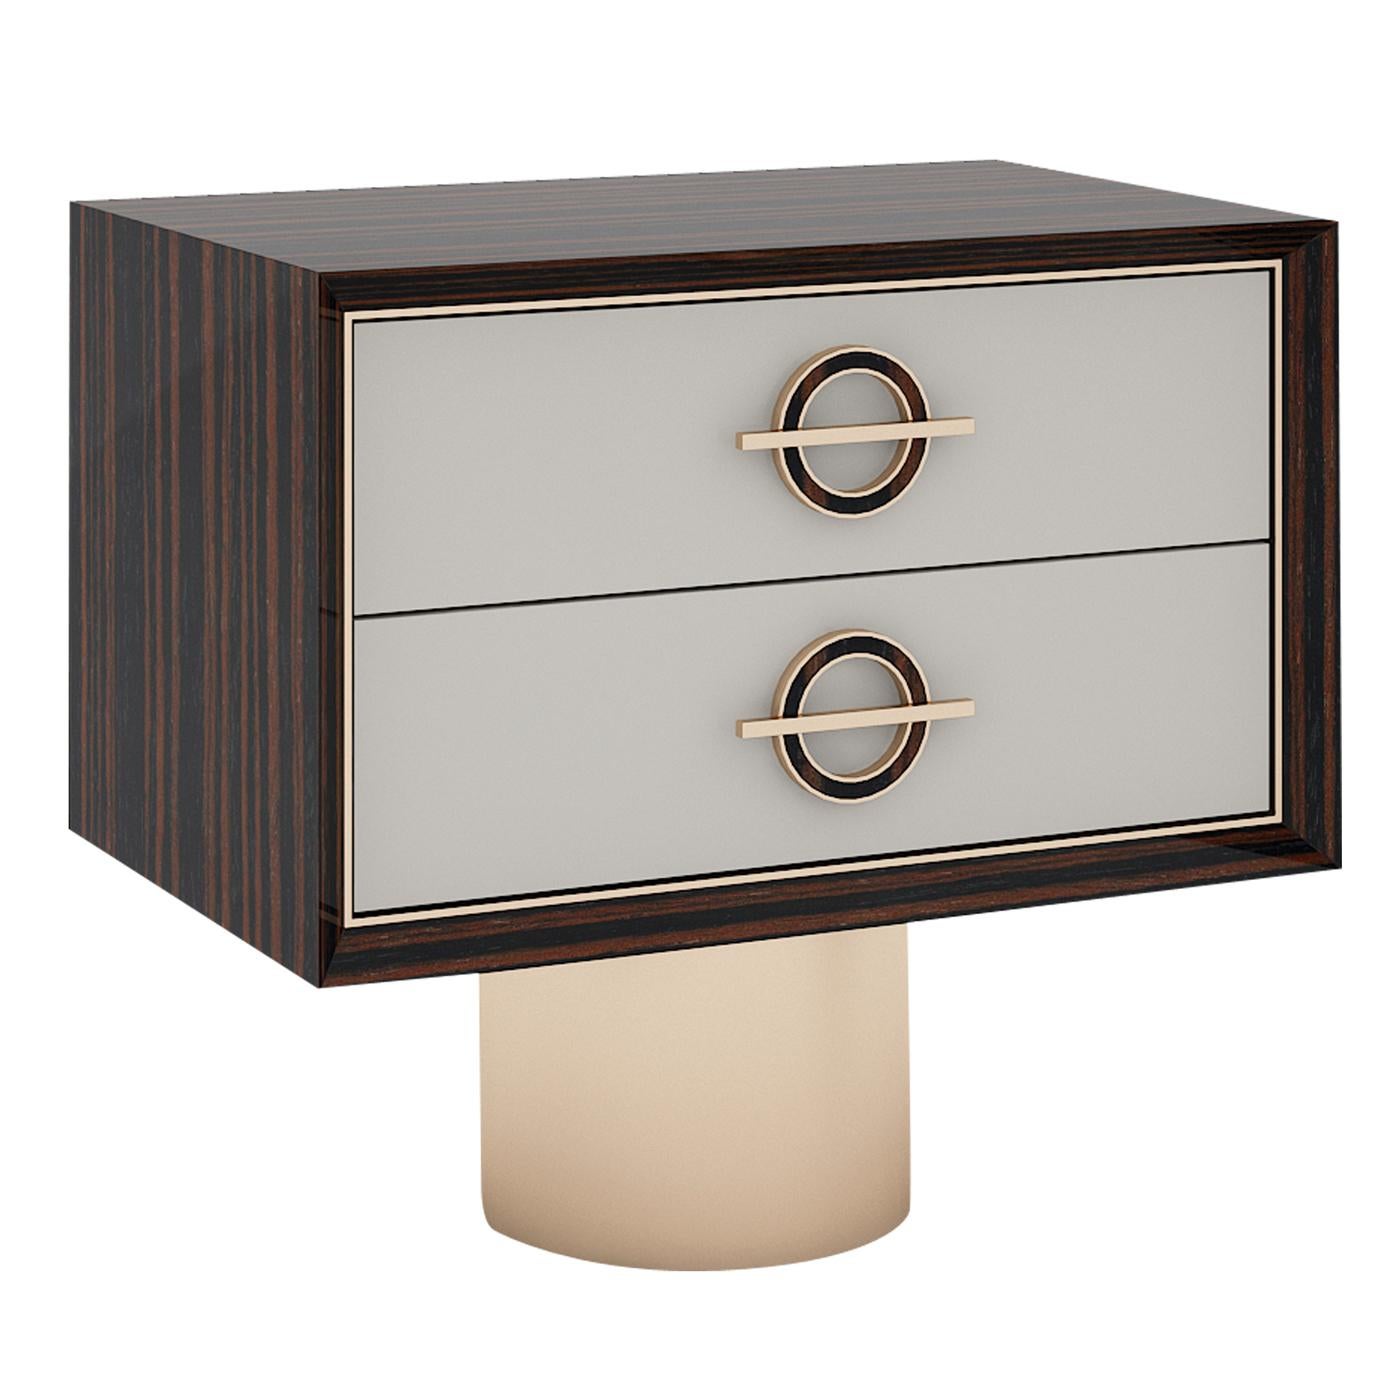 Distinguished by a geometric structure, this polished nightstand showcases a brass-finished cylinder sustaining its wooden top that includes two grey-lacquered drawers. Two circular handles with a horizontal brass-finished metal segment complete the